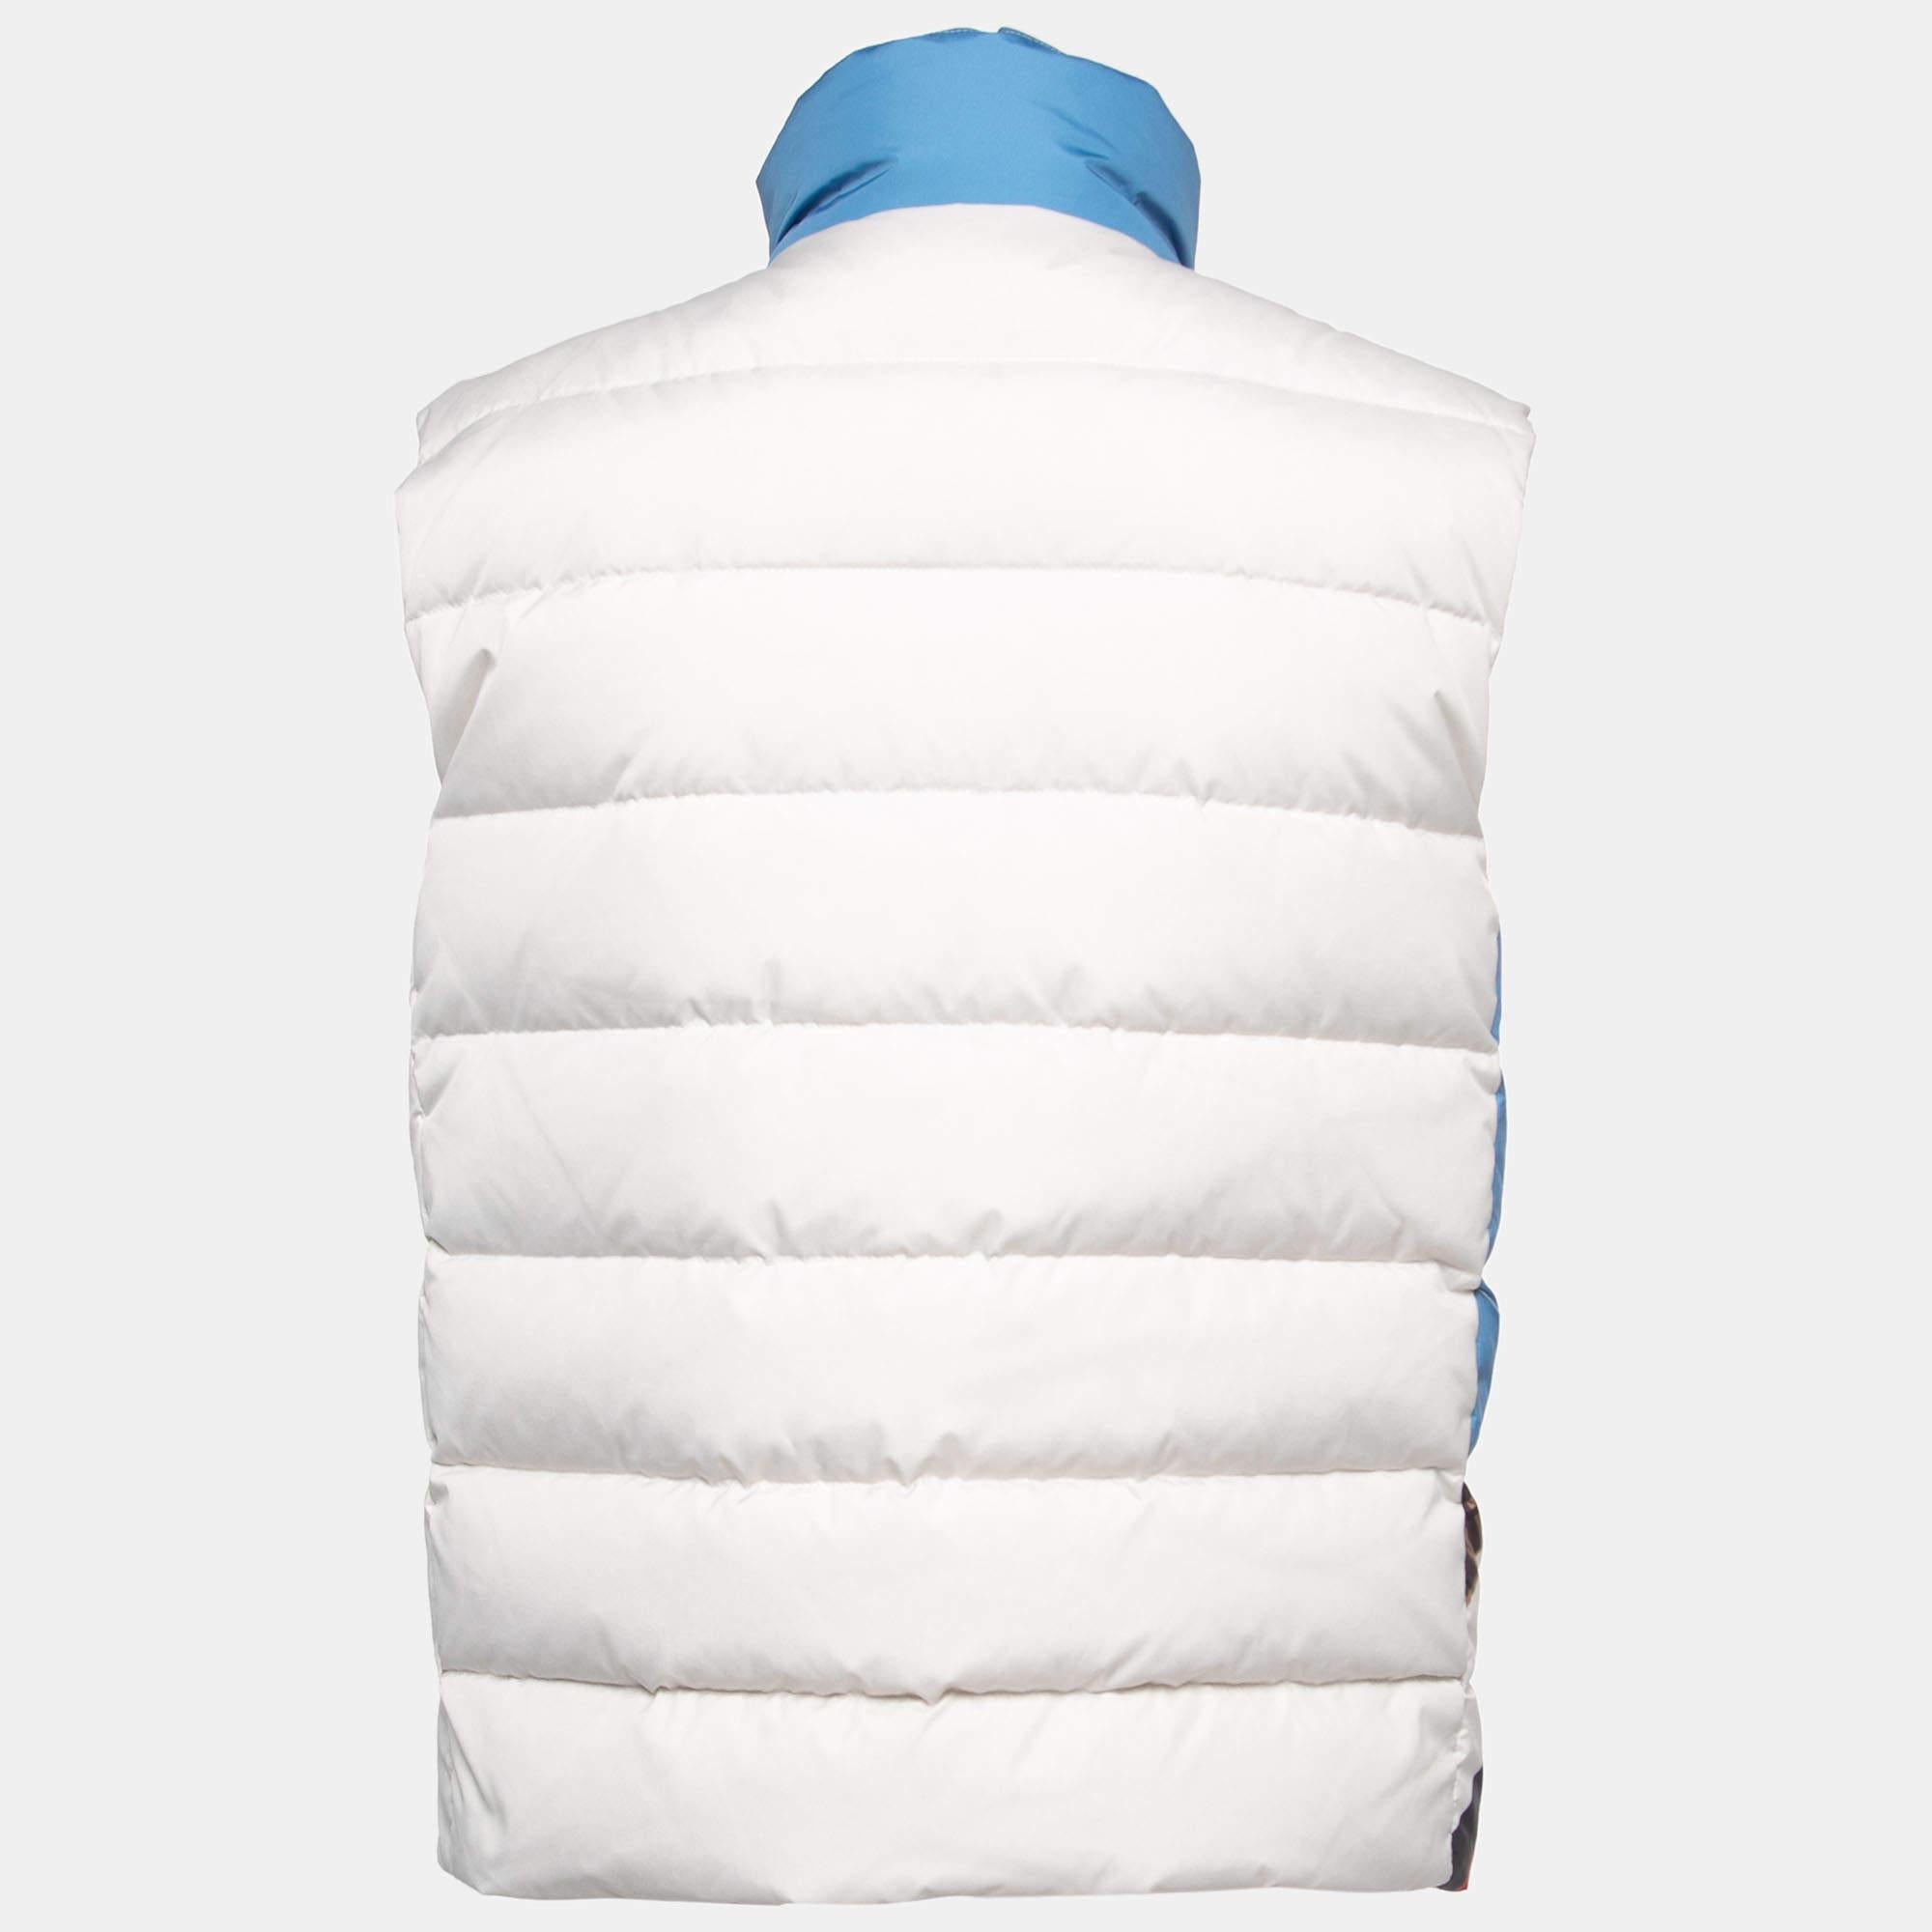 Convenient and cool, this vest by Fendi is designed to offer an unconventional style. The amazing logo prints to the front is enhanced with a characteristic quilted design and two pockets. This jacket is complete with a zip fastening.

